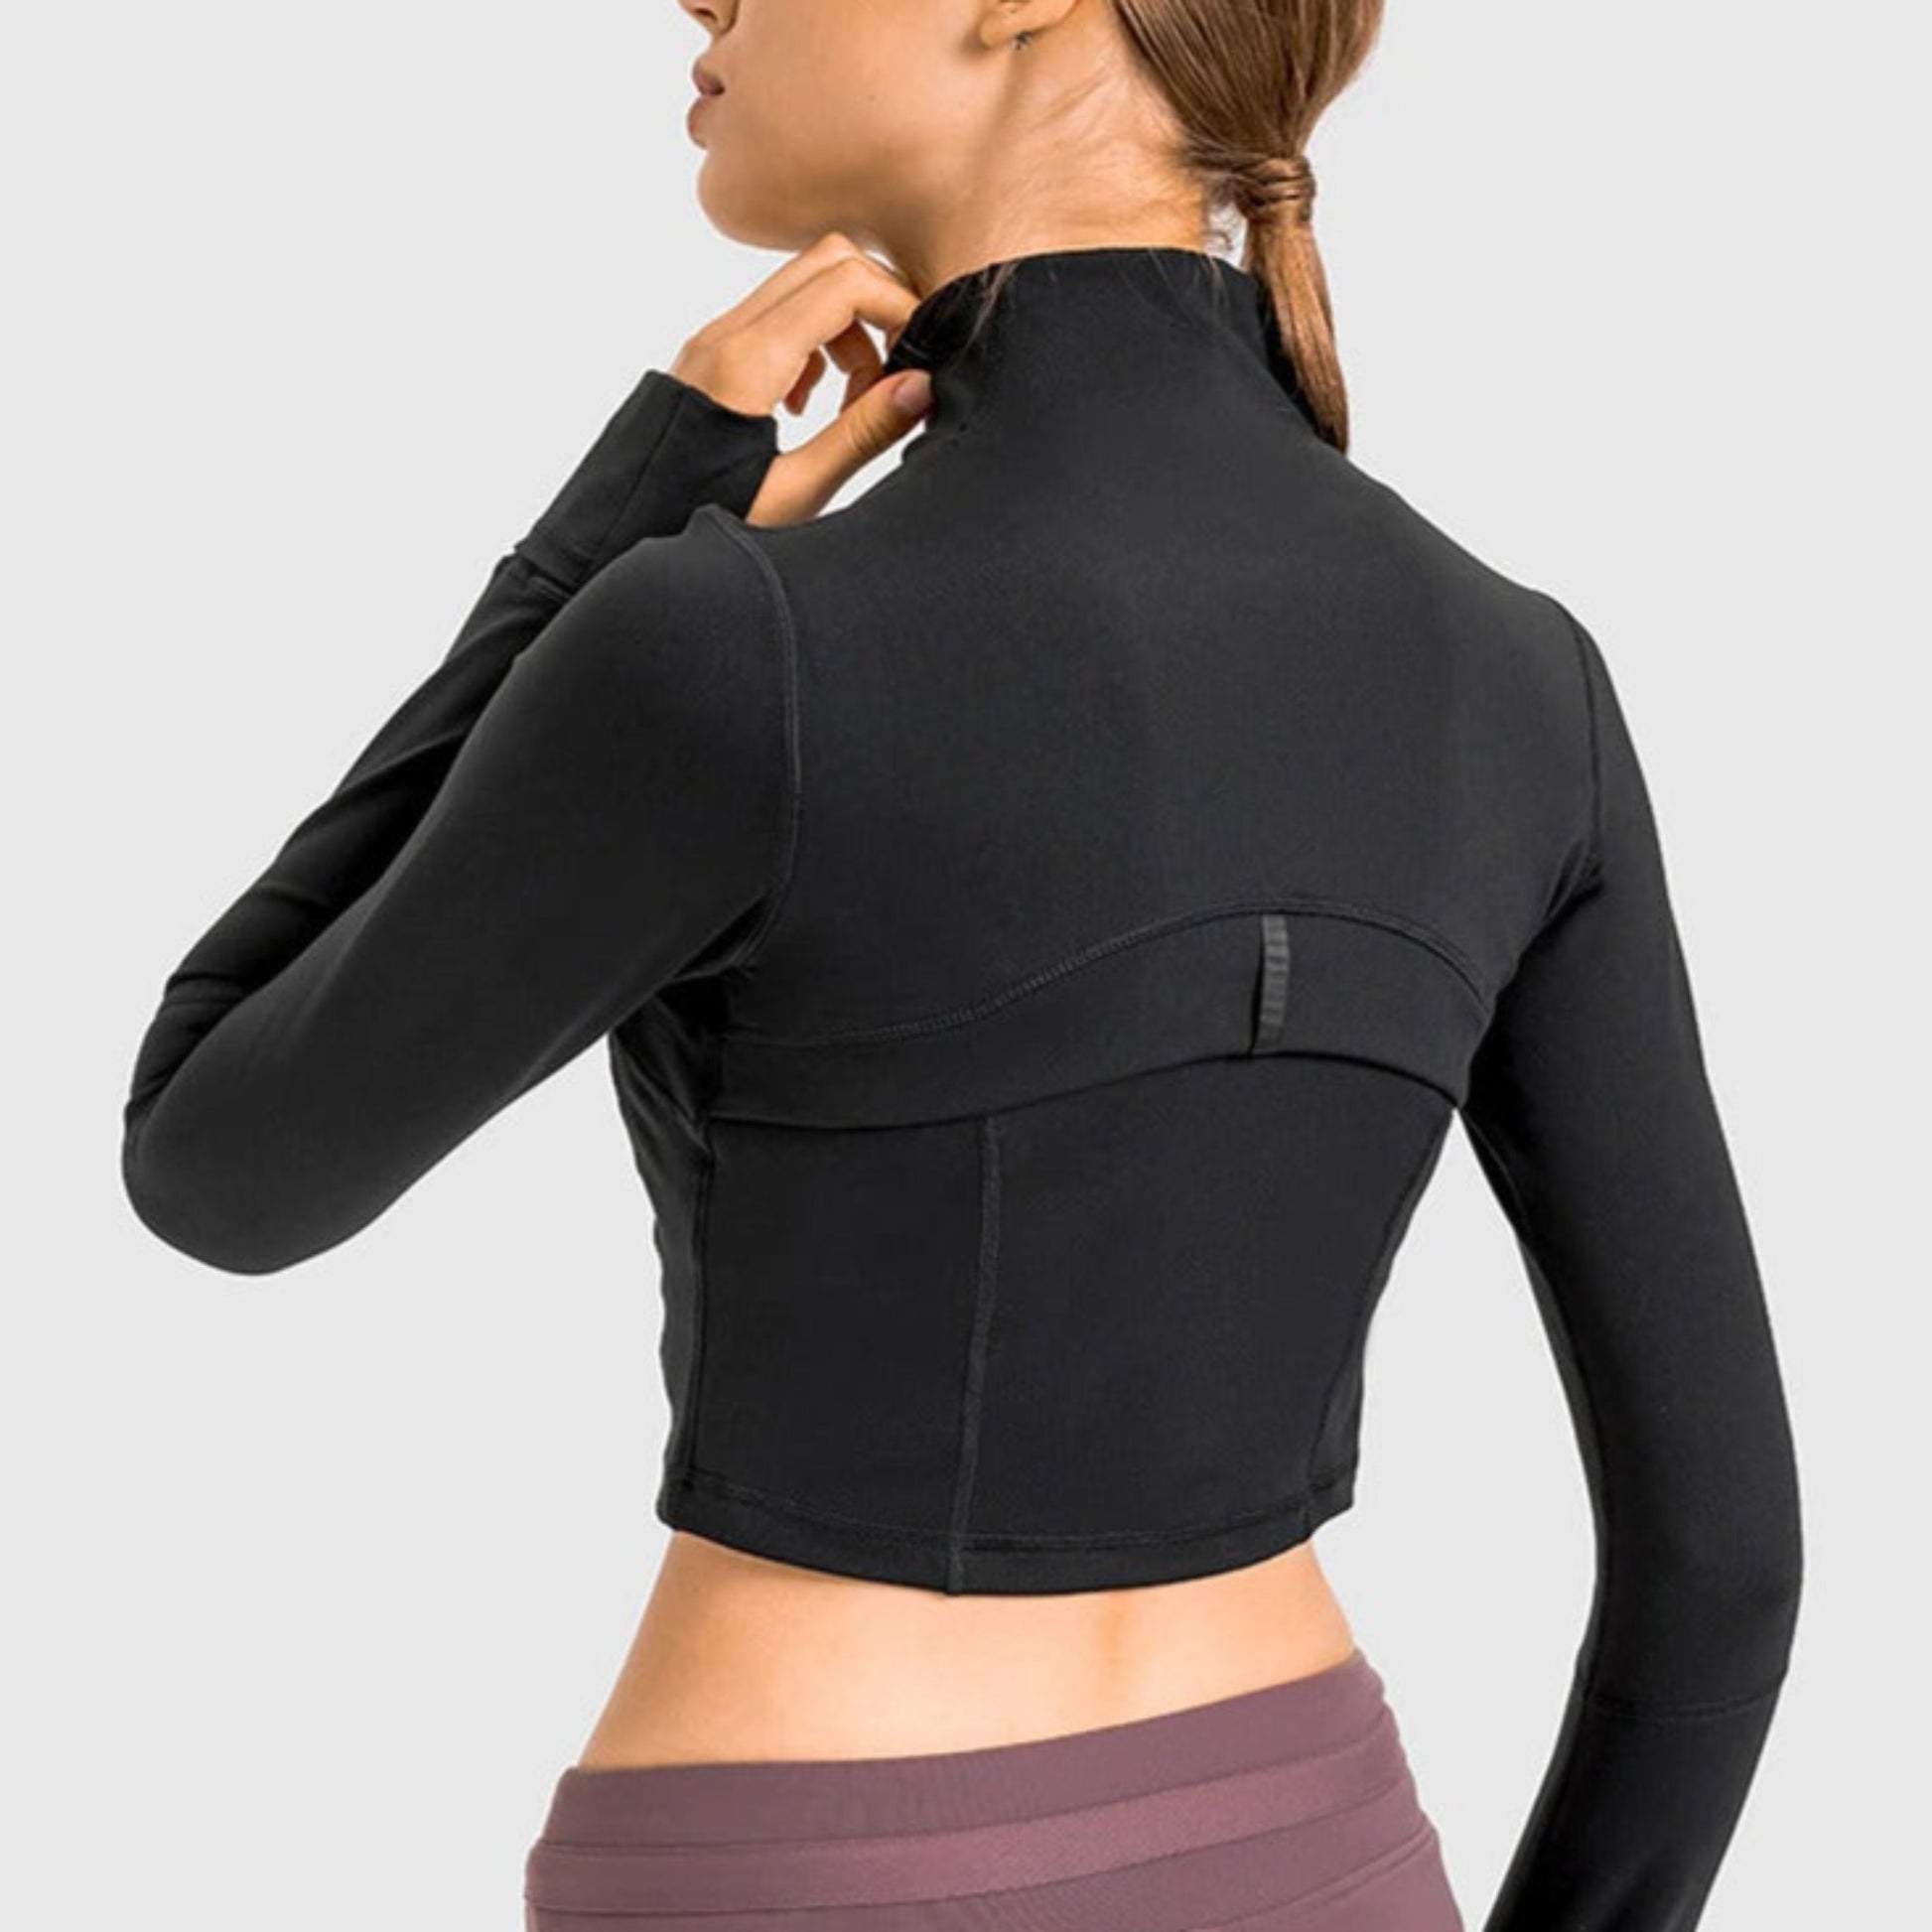 Woman's Workout Jacket, Cropped and Fitted